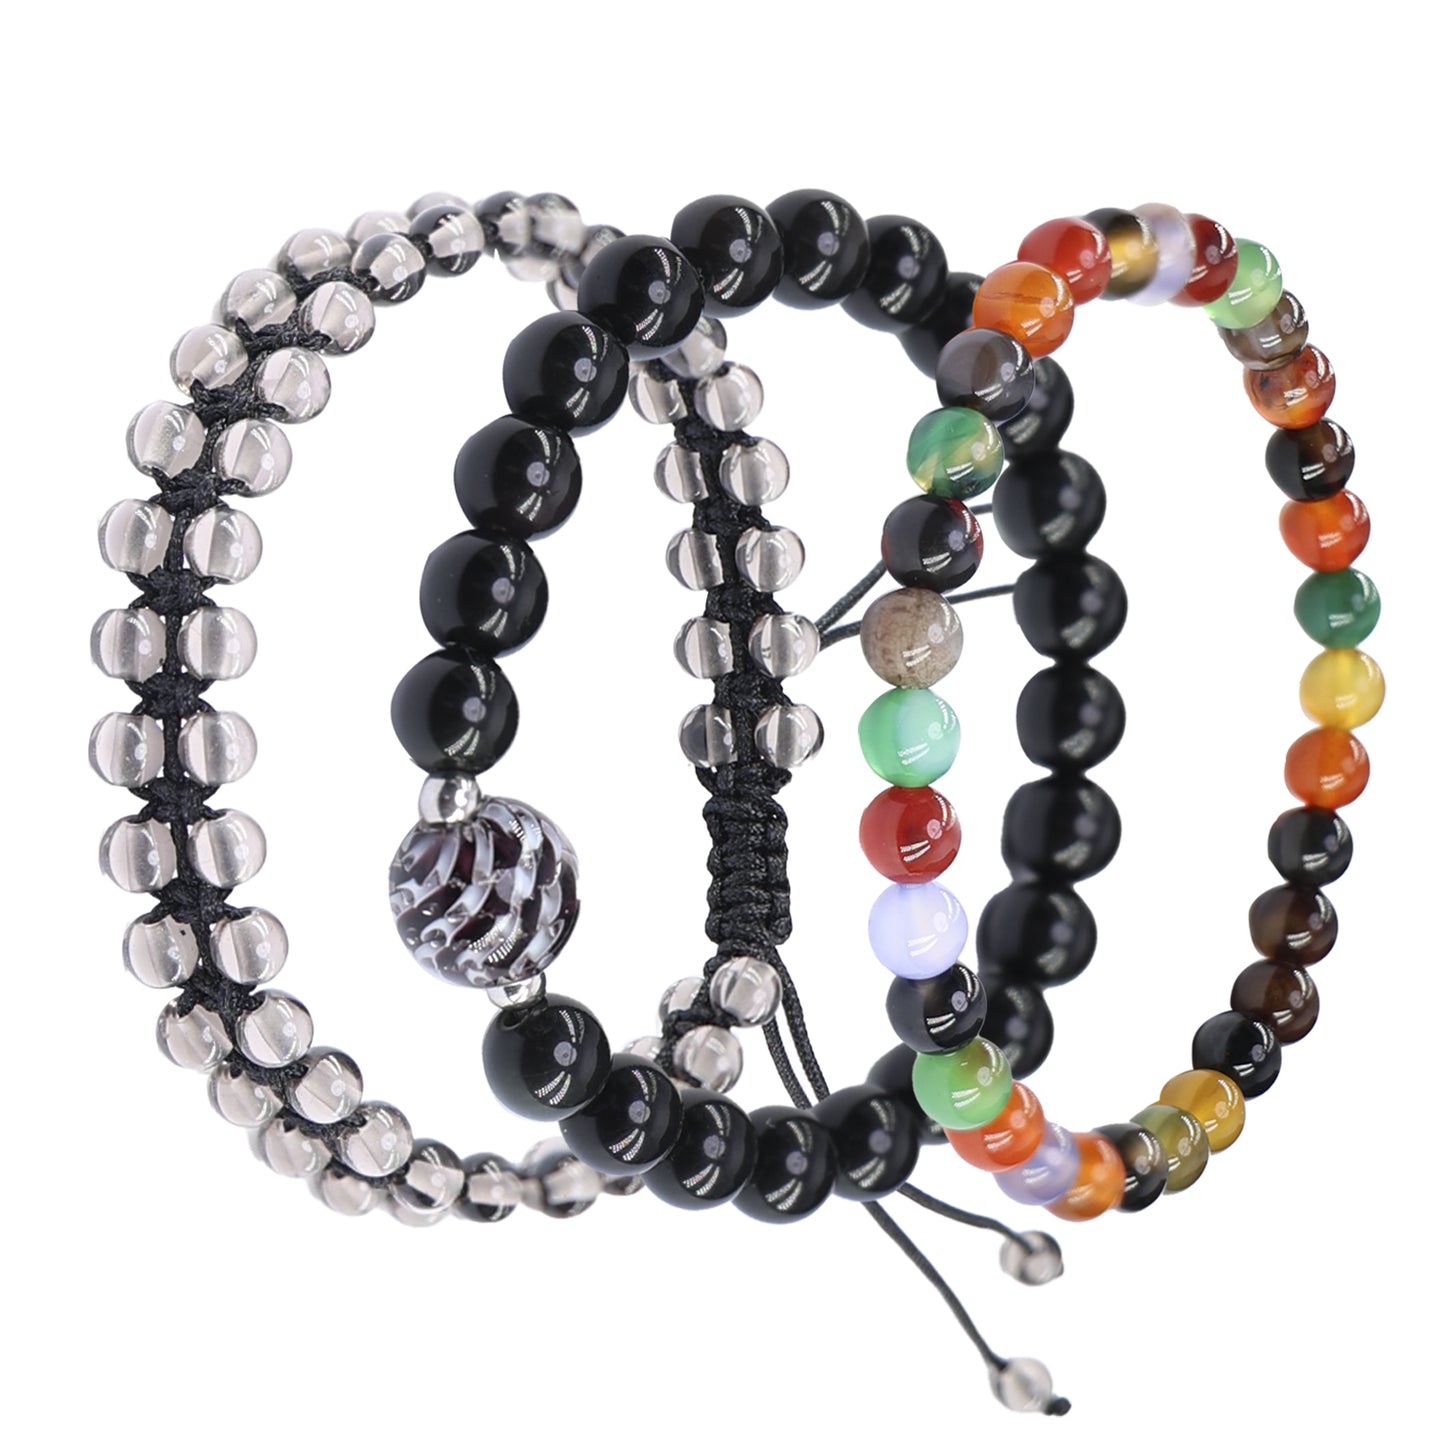 Natural Tourmaline Bracelet Color Tourmalinggangan Black Obsidian Beads Pere Bracelet for Variant Set of Three Handmade Bracelets for gifts for friends, family and others